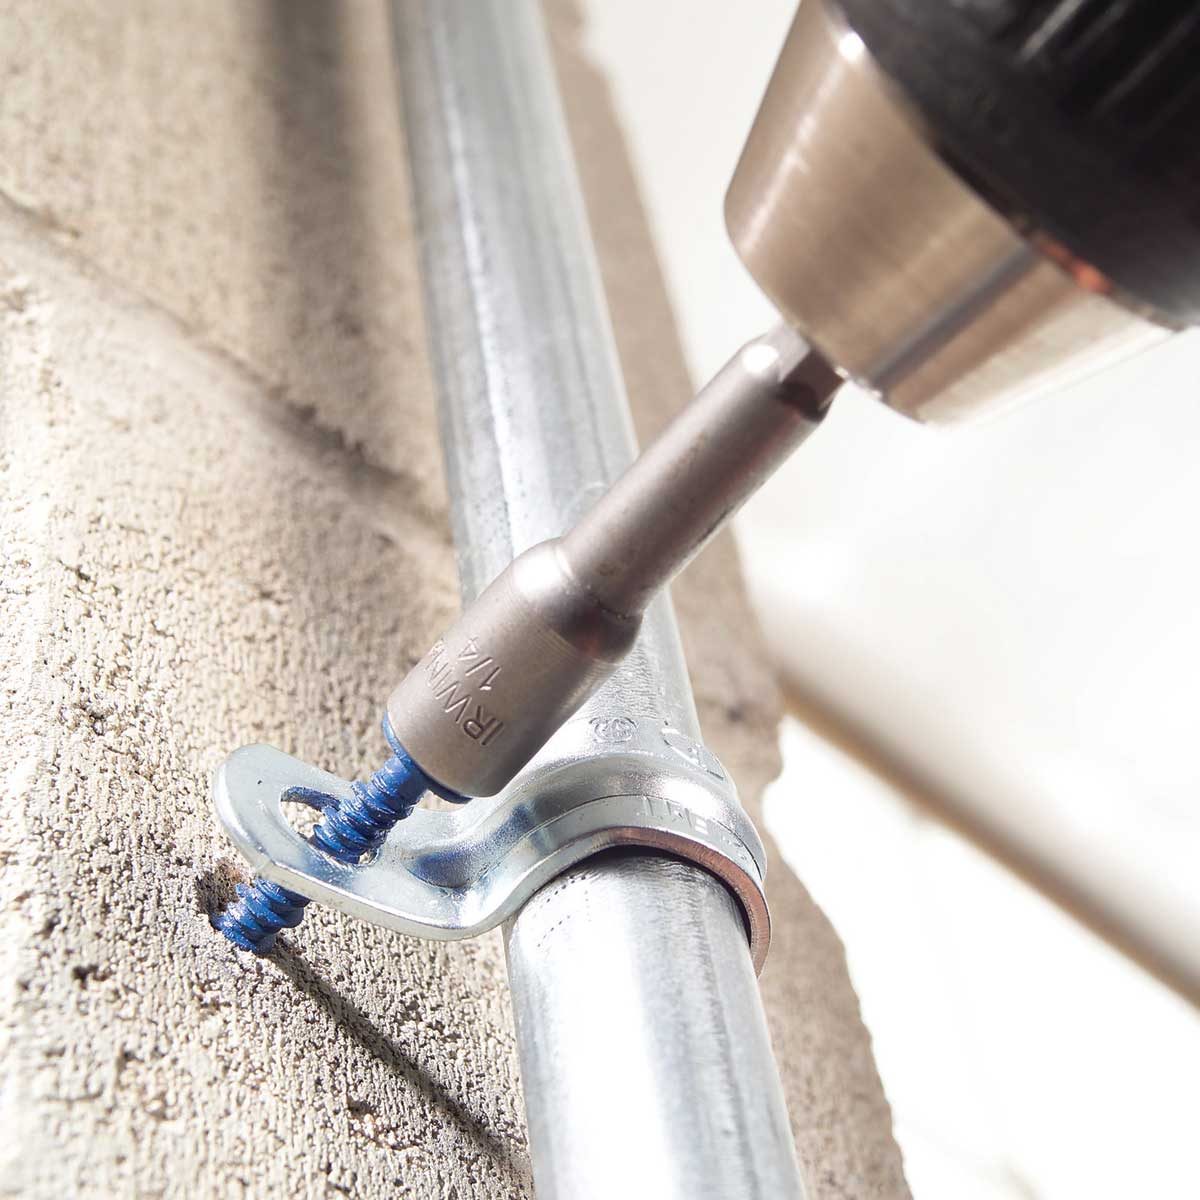 drilling concrete fasteners stopping point